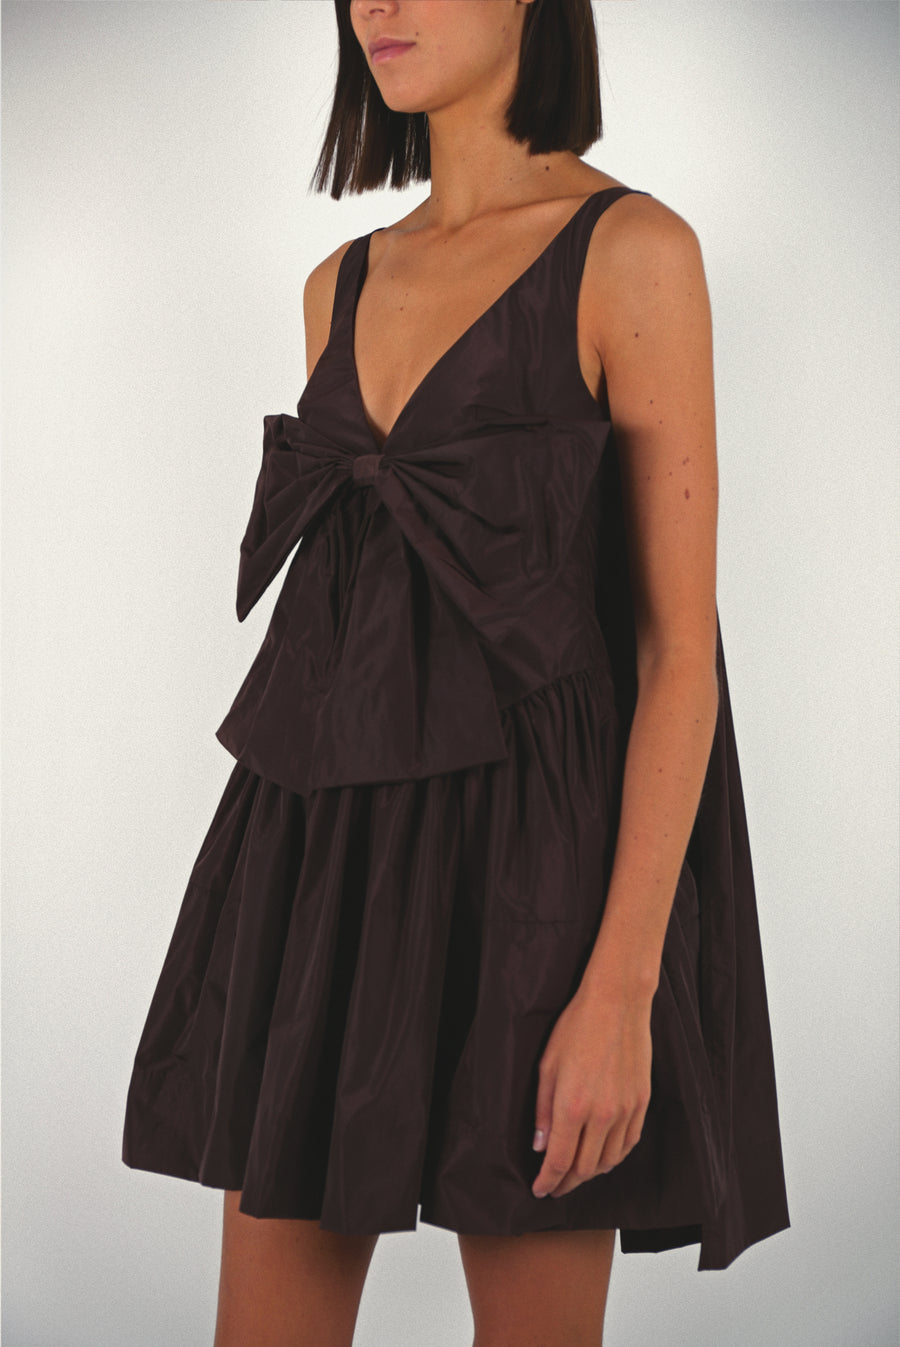 Mini dress in coffee brown taffeta with bow at front and cape in back on model